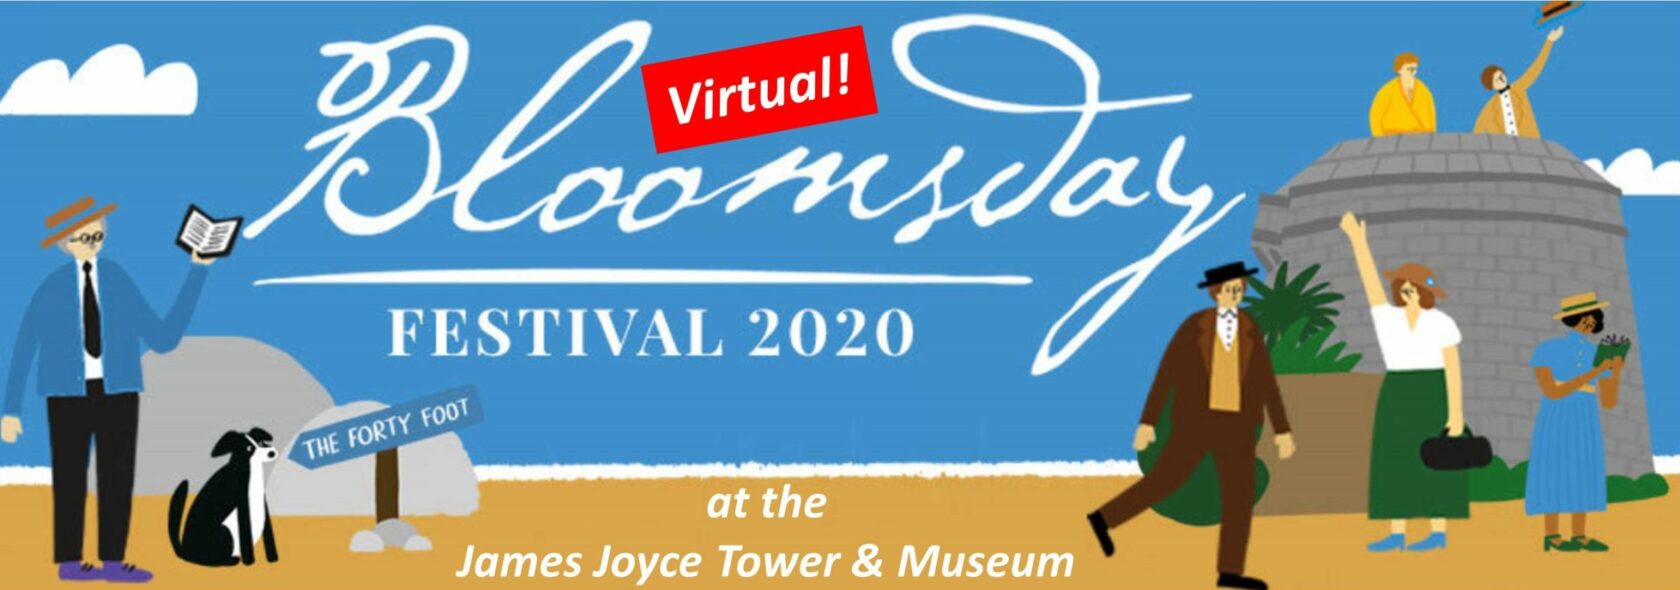 ‘Covid’ Bloomsday Celebrated by the Friends of Joyce Tower Society